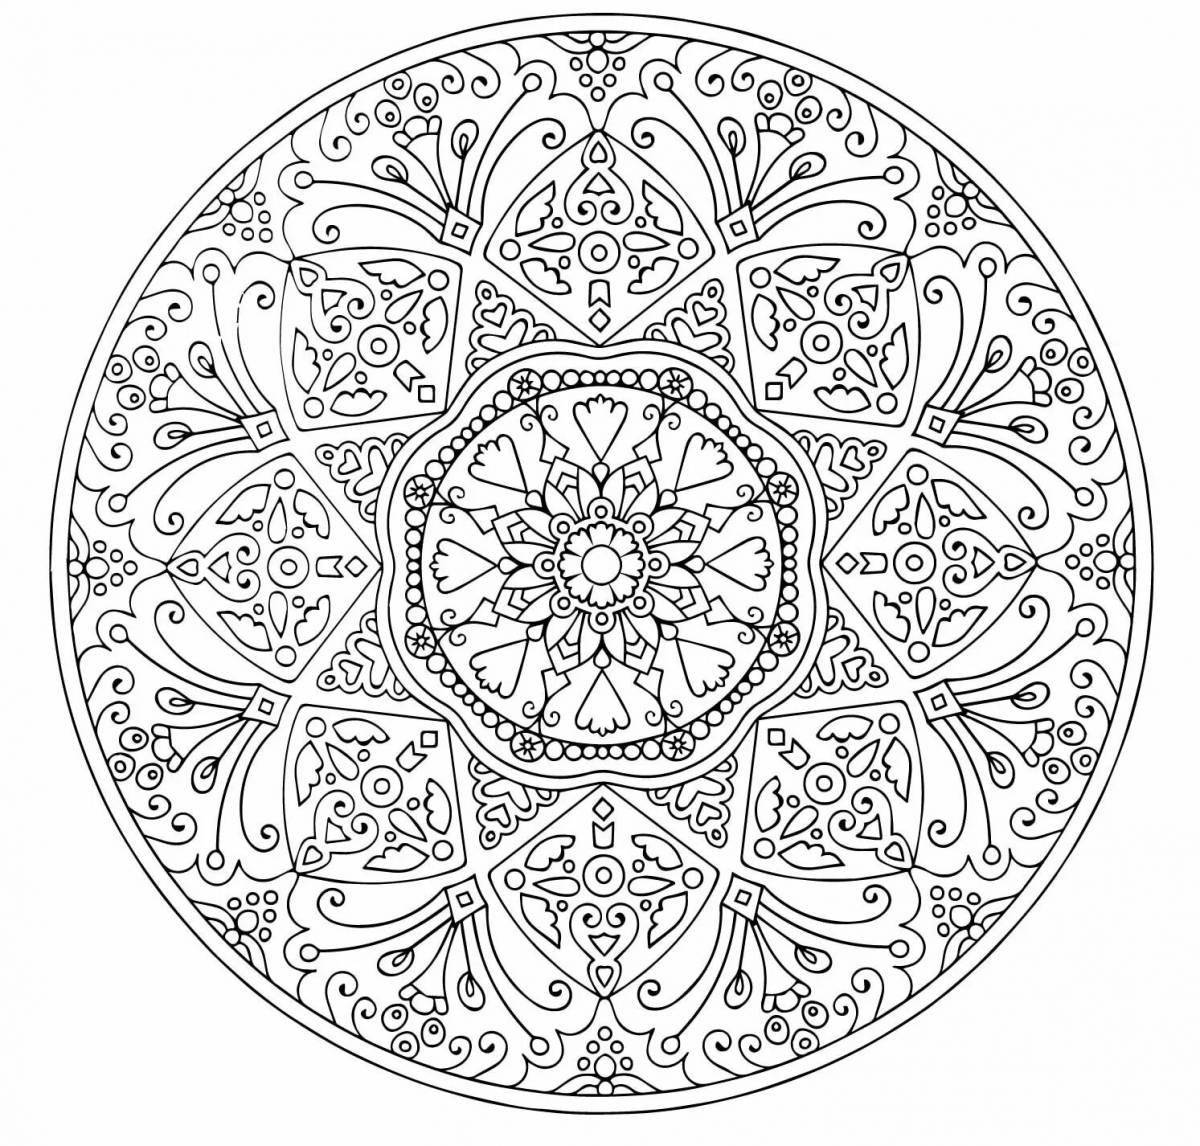 Informative coloring book for peace of mind